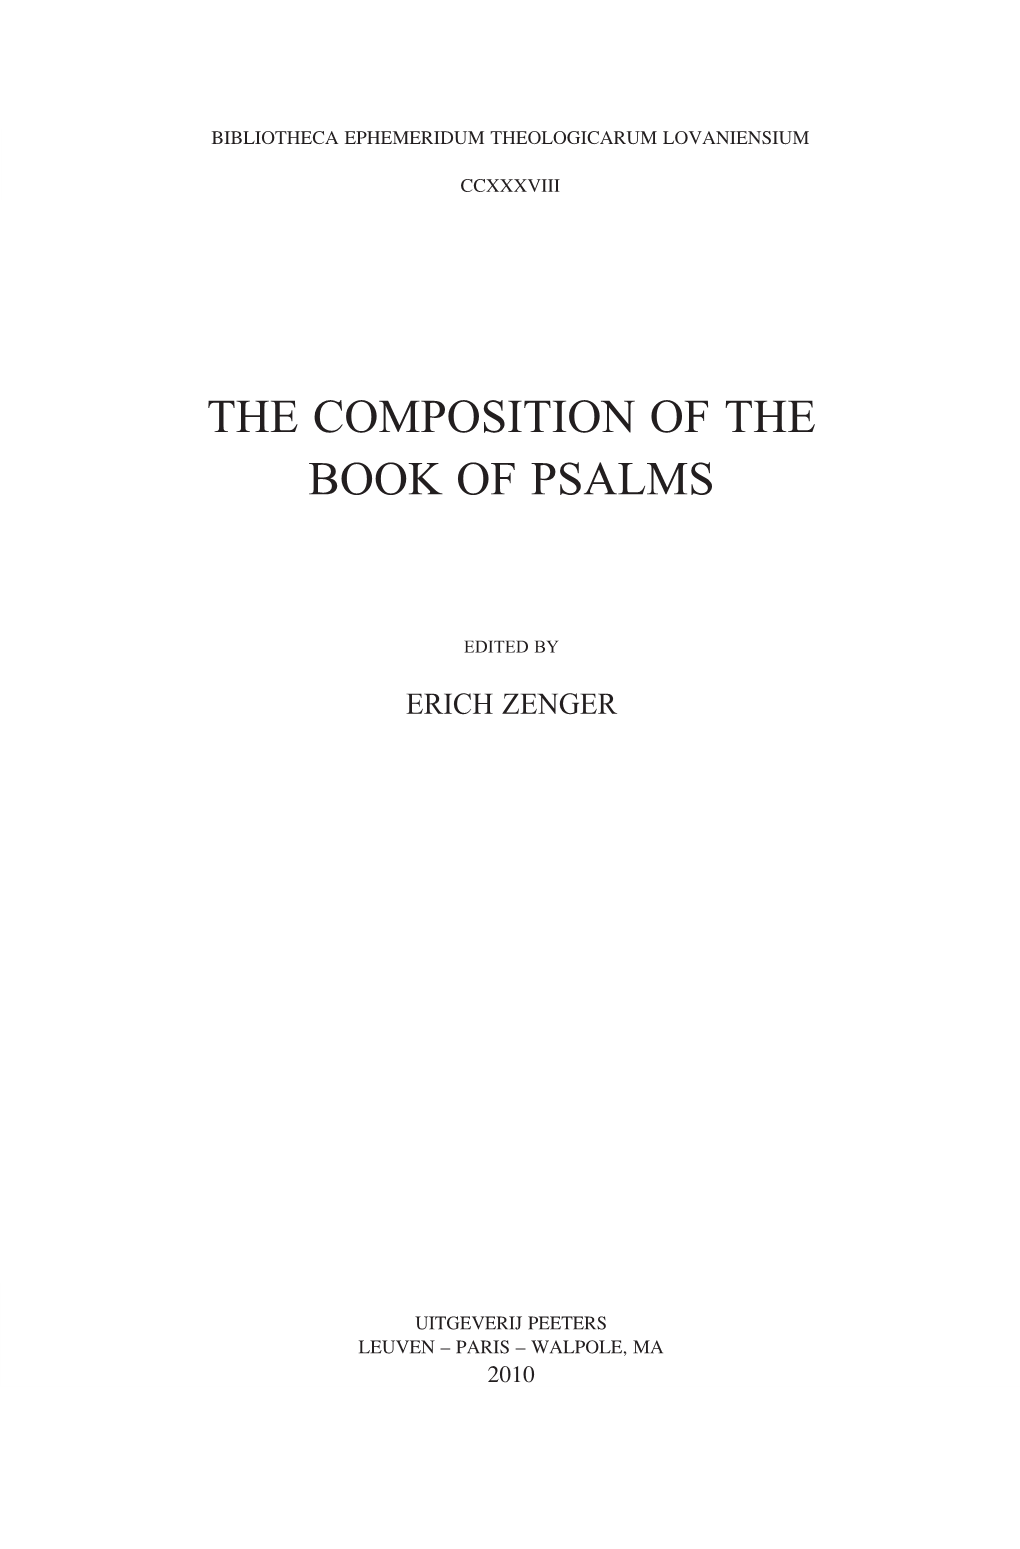 The Composition of the Book of Psalms